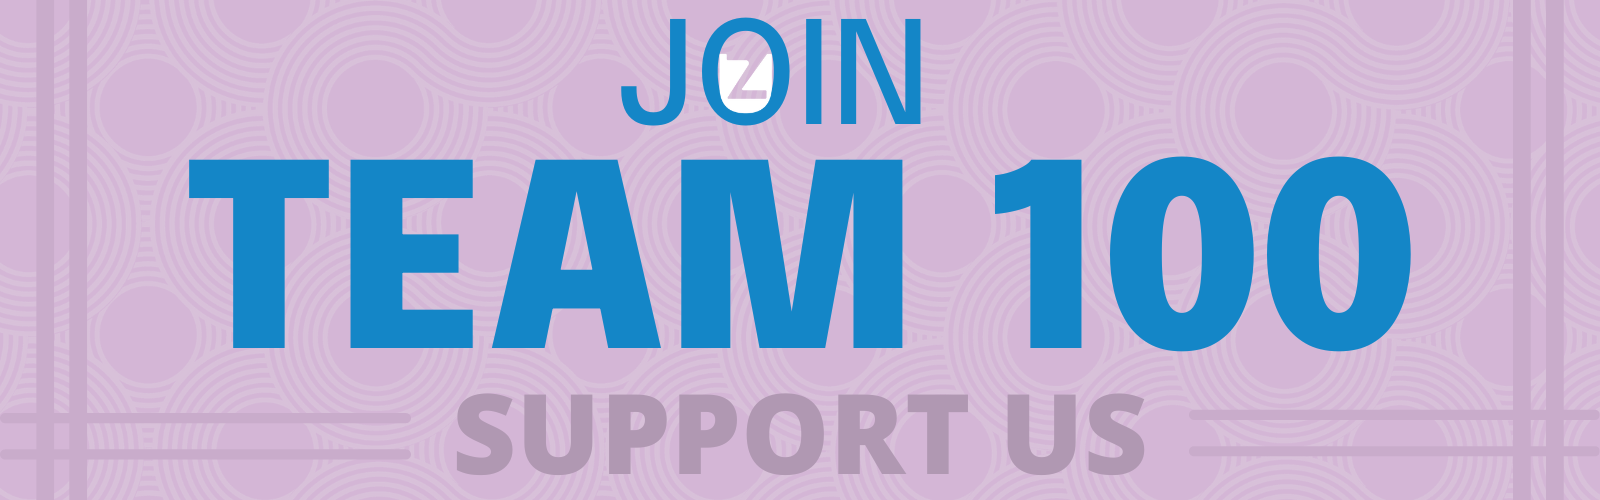 Blue text on a lavender background reads: "Join Team 100 — support us".